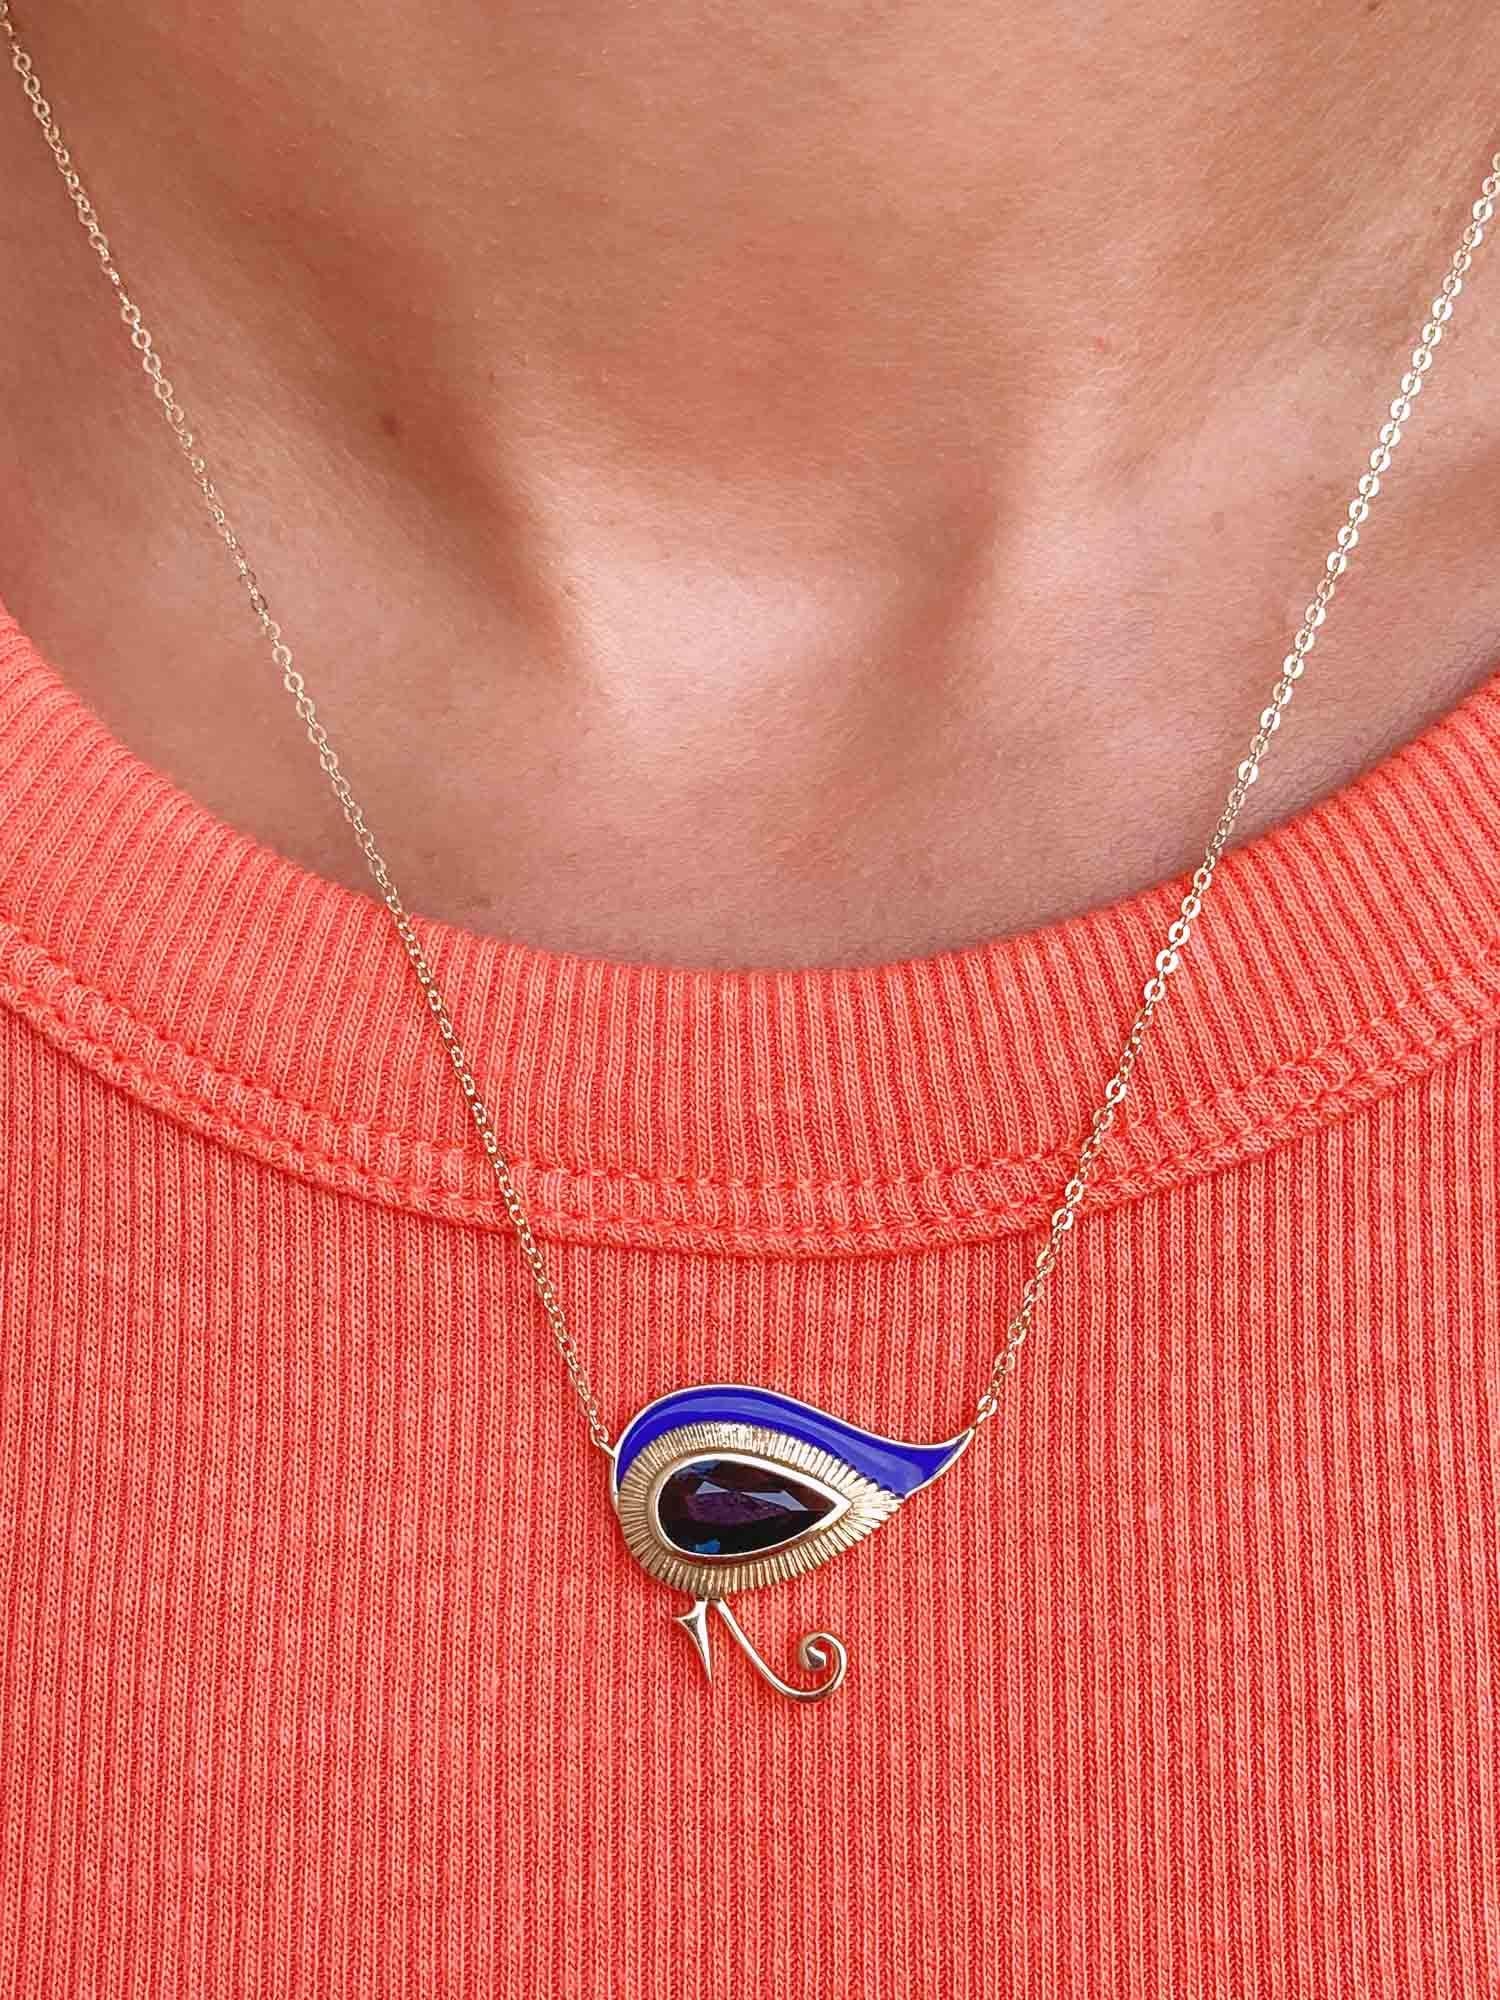 Eye of Horus 1.82ct Nigerian Sapphire with Blue Enamel 9K Gold Necklace In New Condition For Sale In Osprey, FL